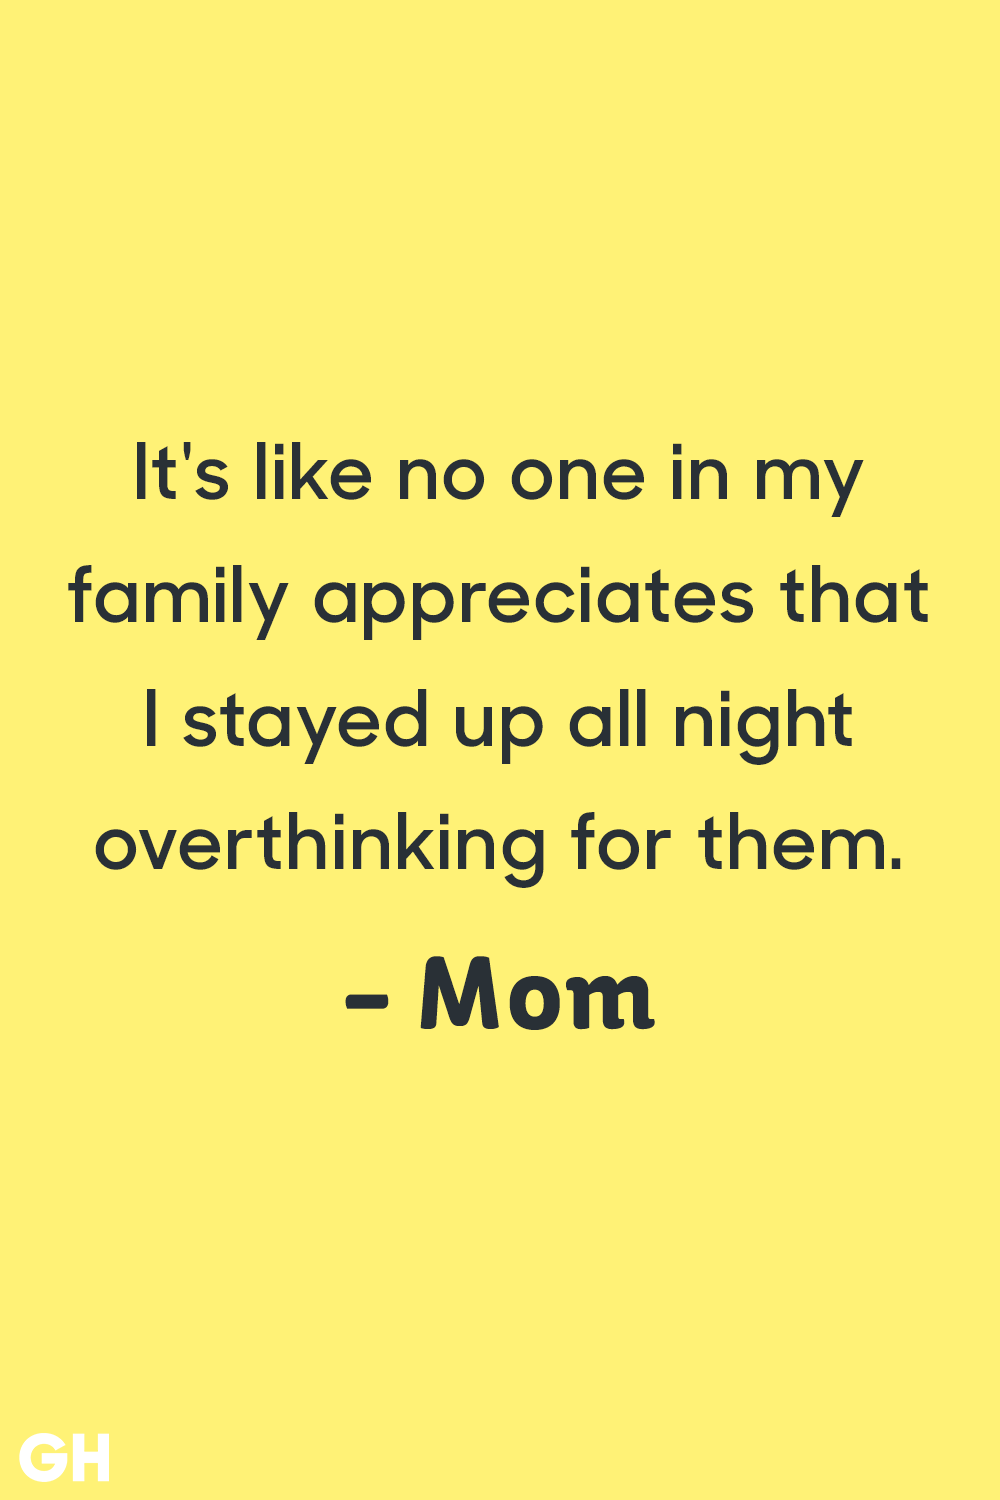 Funny quotes and sayings about moms